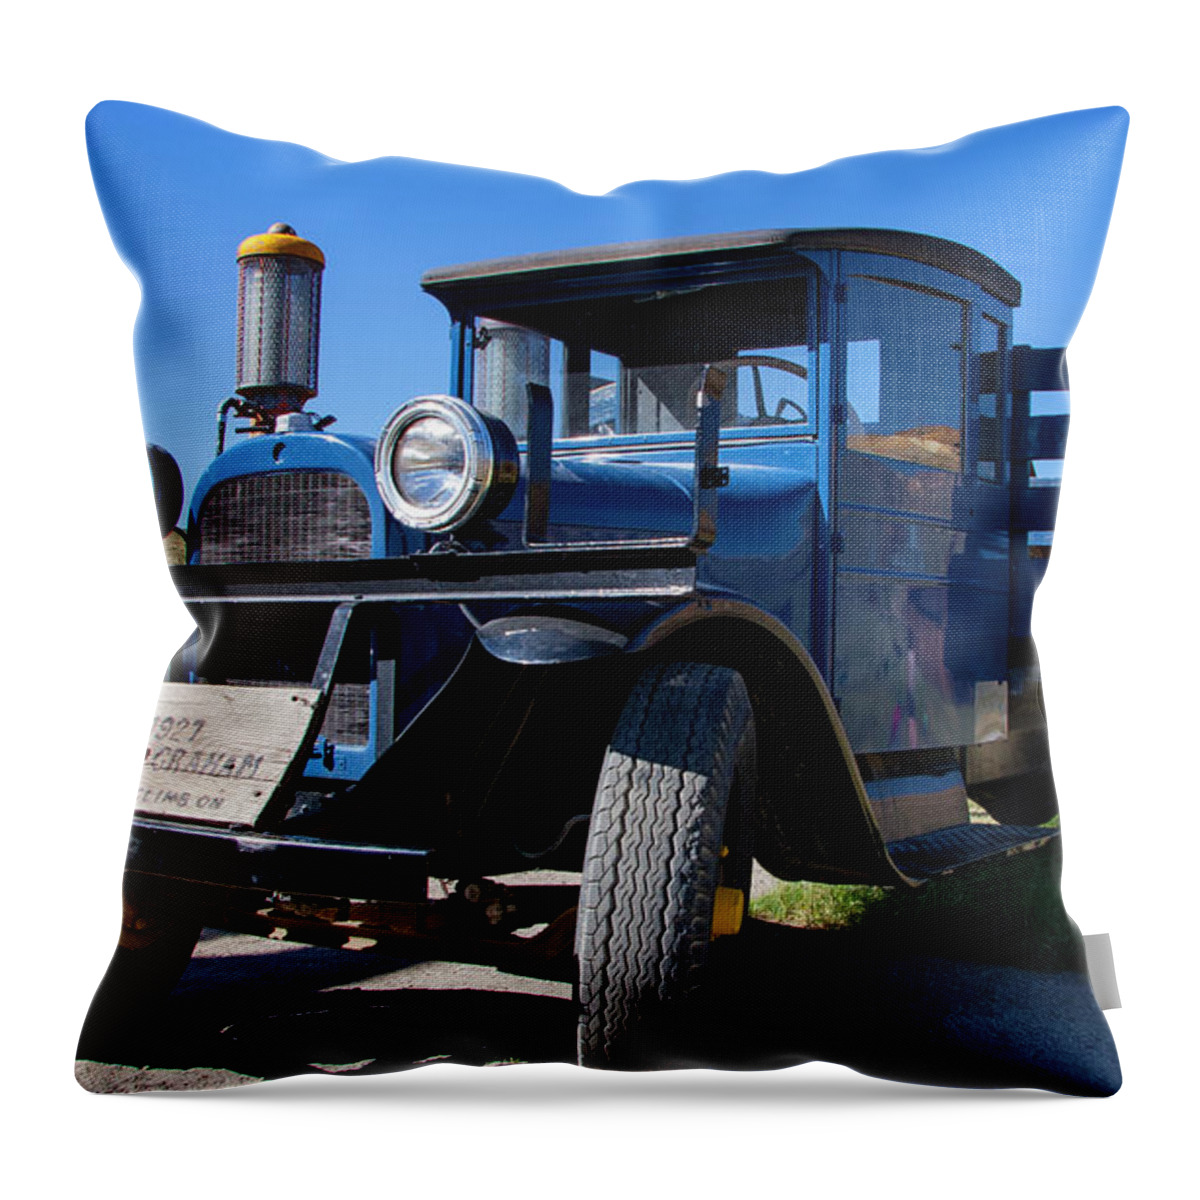 Vintage Vehicle Throw Pillow featuring the photograph 1927 Dodge Graham 1 by Chris Brannen